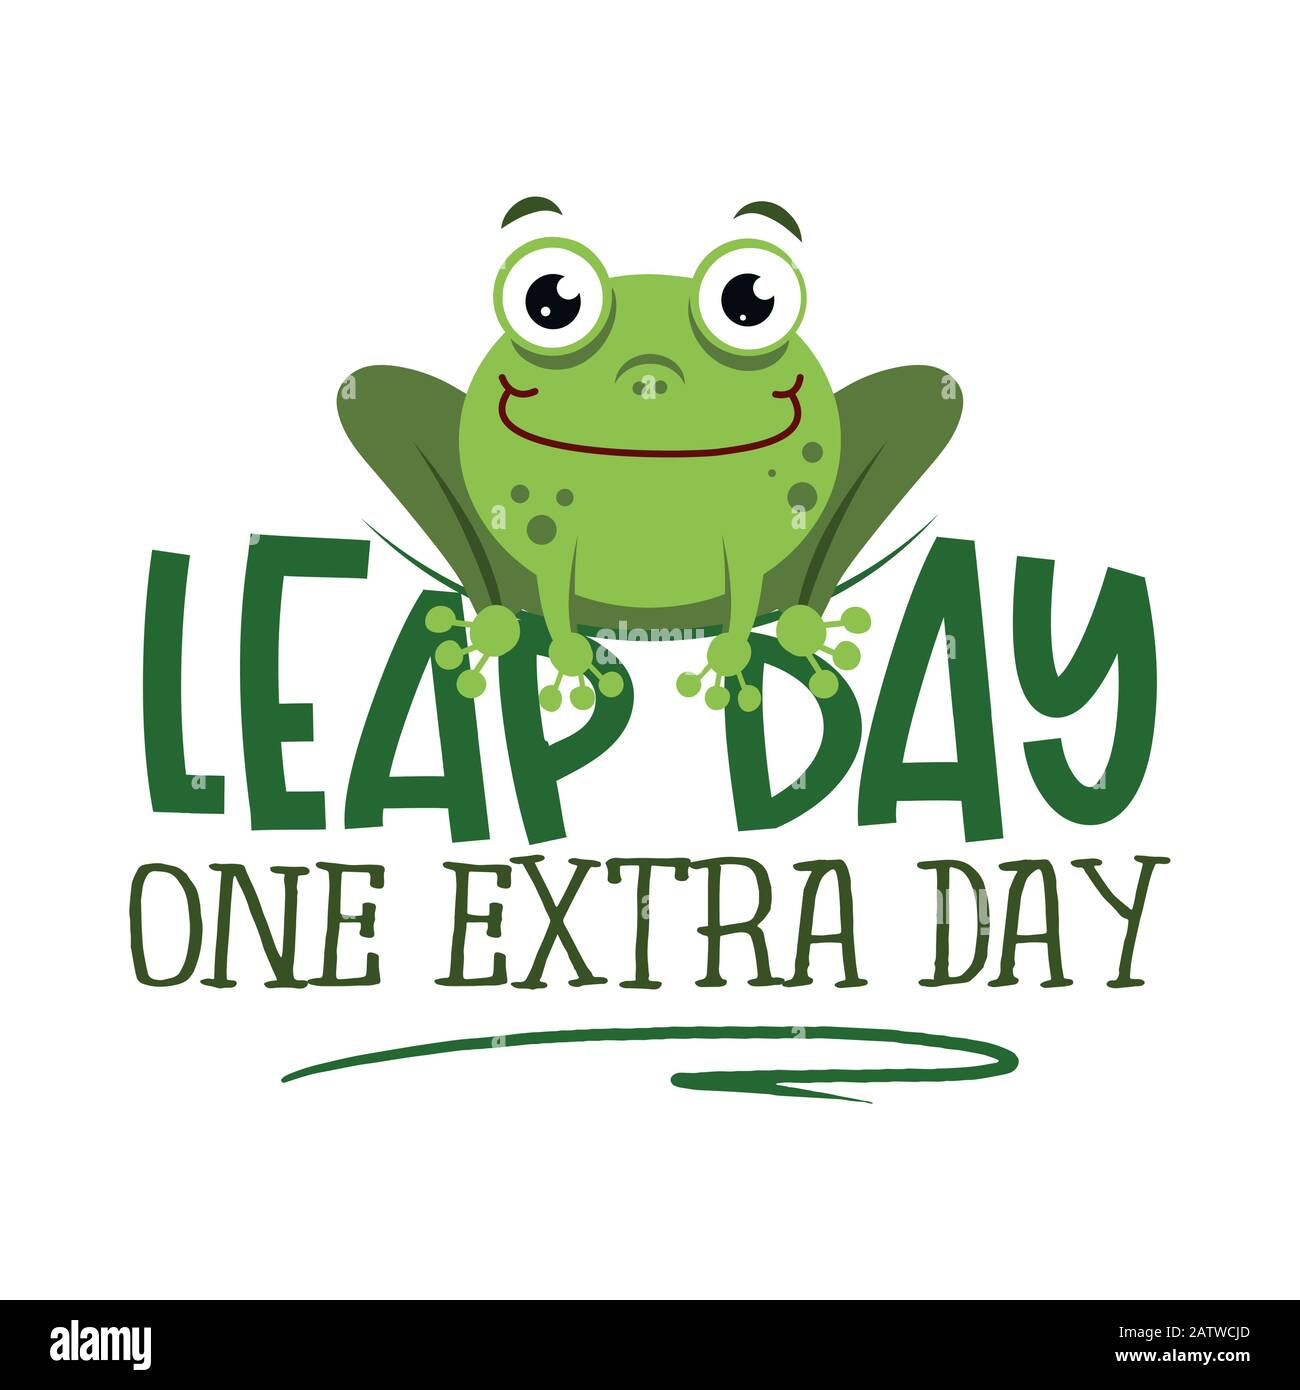 https://c8.alamy.com/comp/2ATWCJD/leap-day-one-extra-day-leap-year-29-february-calendar-page-with-cute-frog-background-leap-day-leap-year-29-february-calendar-and-froggy-illustrati-2ATWCJD.jpg